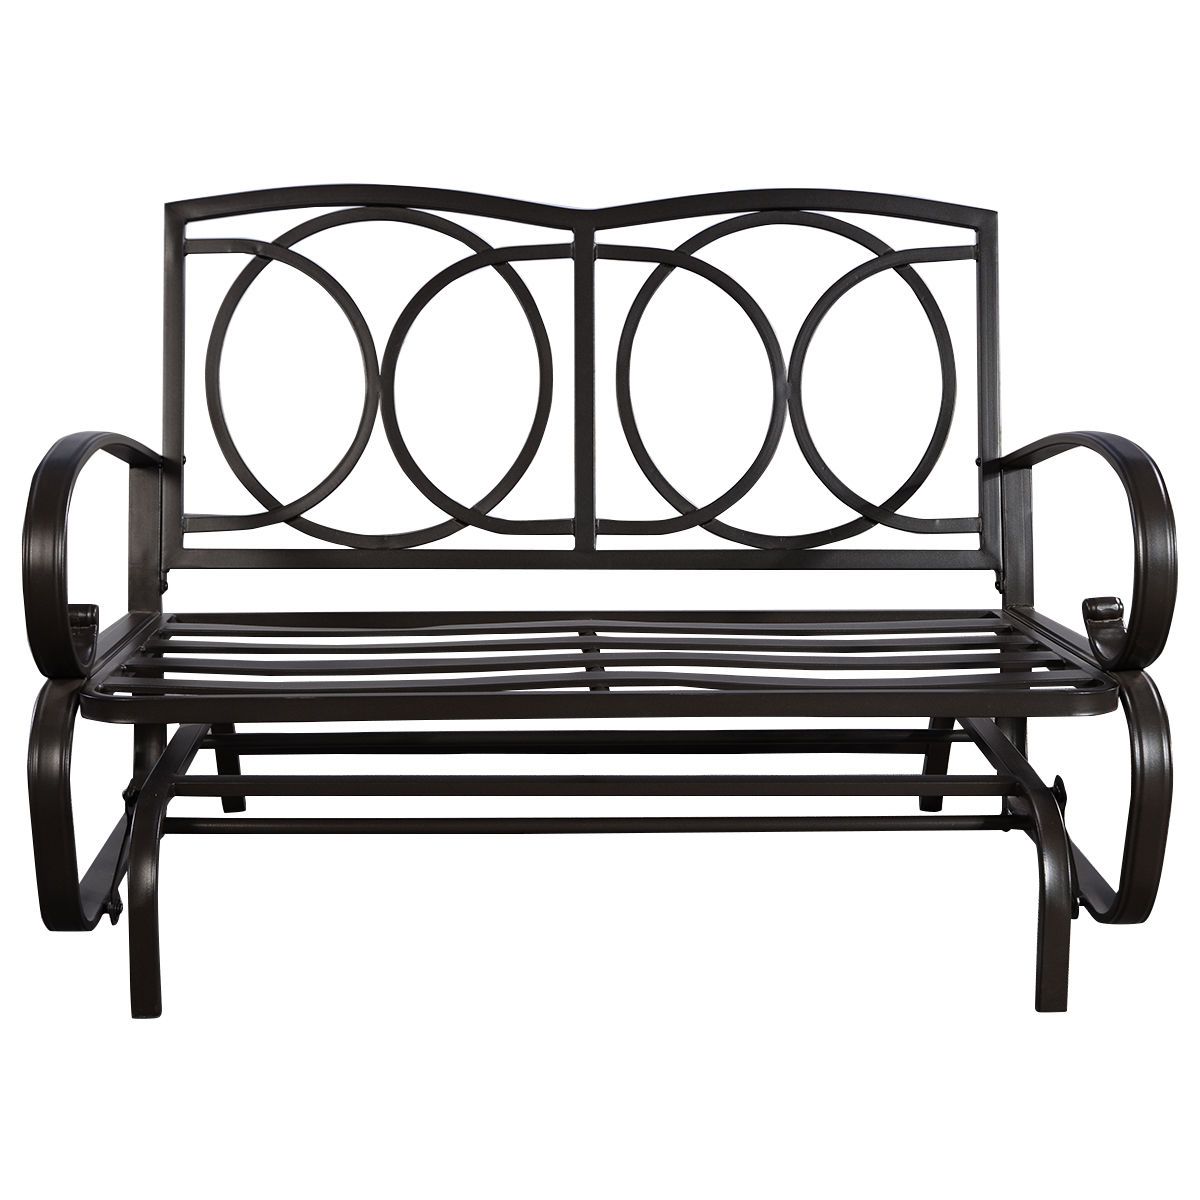 Latest Details About Glider Outdoor Patio Rocking Bench Loveseat Cushioned Seat  Steel Frame Furniture Throughout Cushioned Glider Benches With Cushions (View 17 of 30)